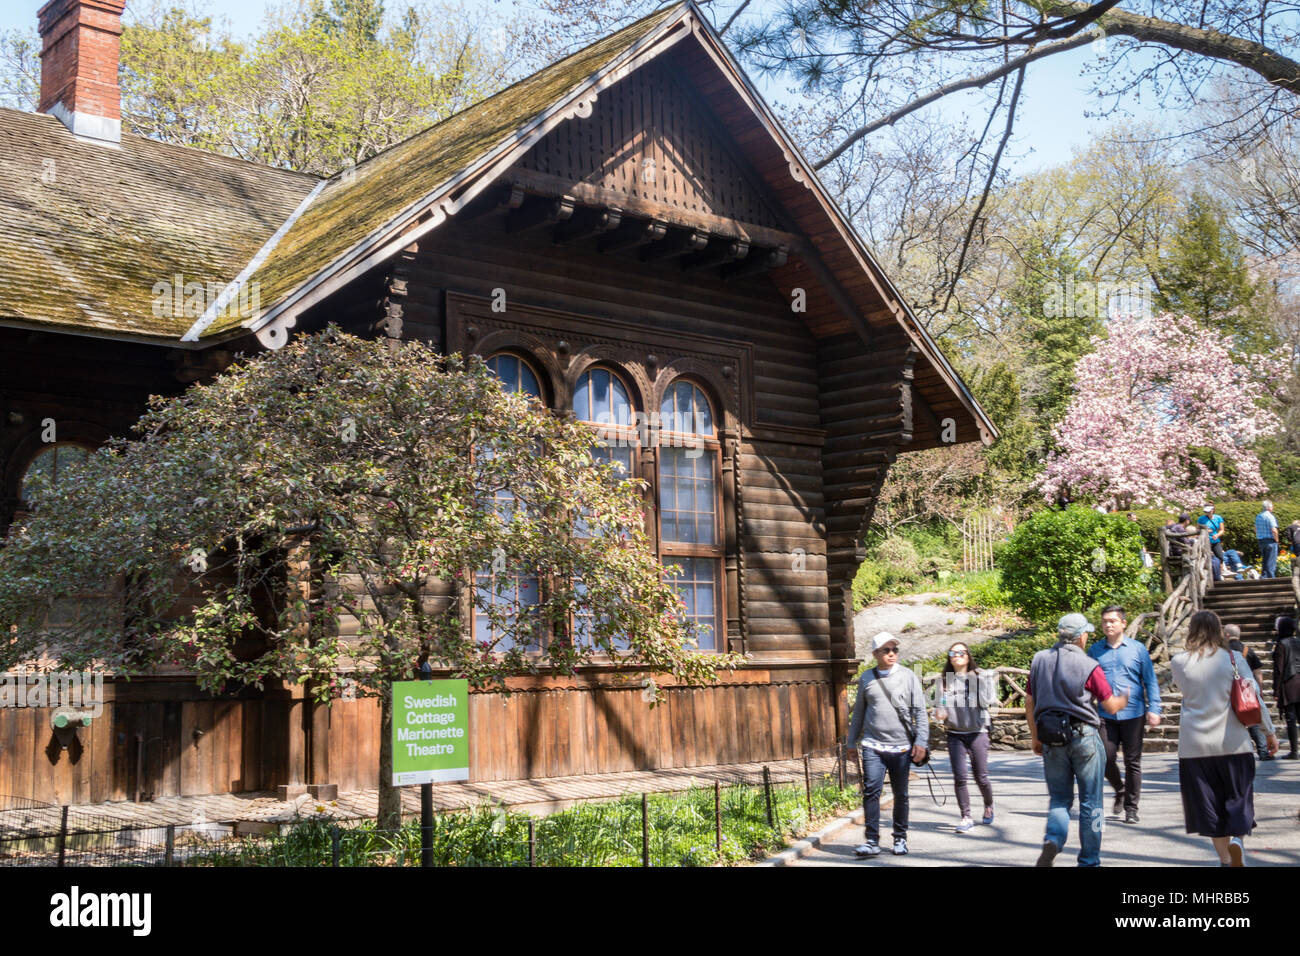 Swedish Cottage Marionette Theatre In Central Park Nyc Usa Stock